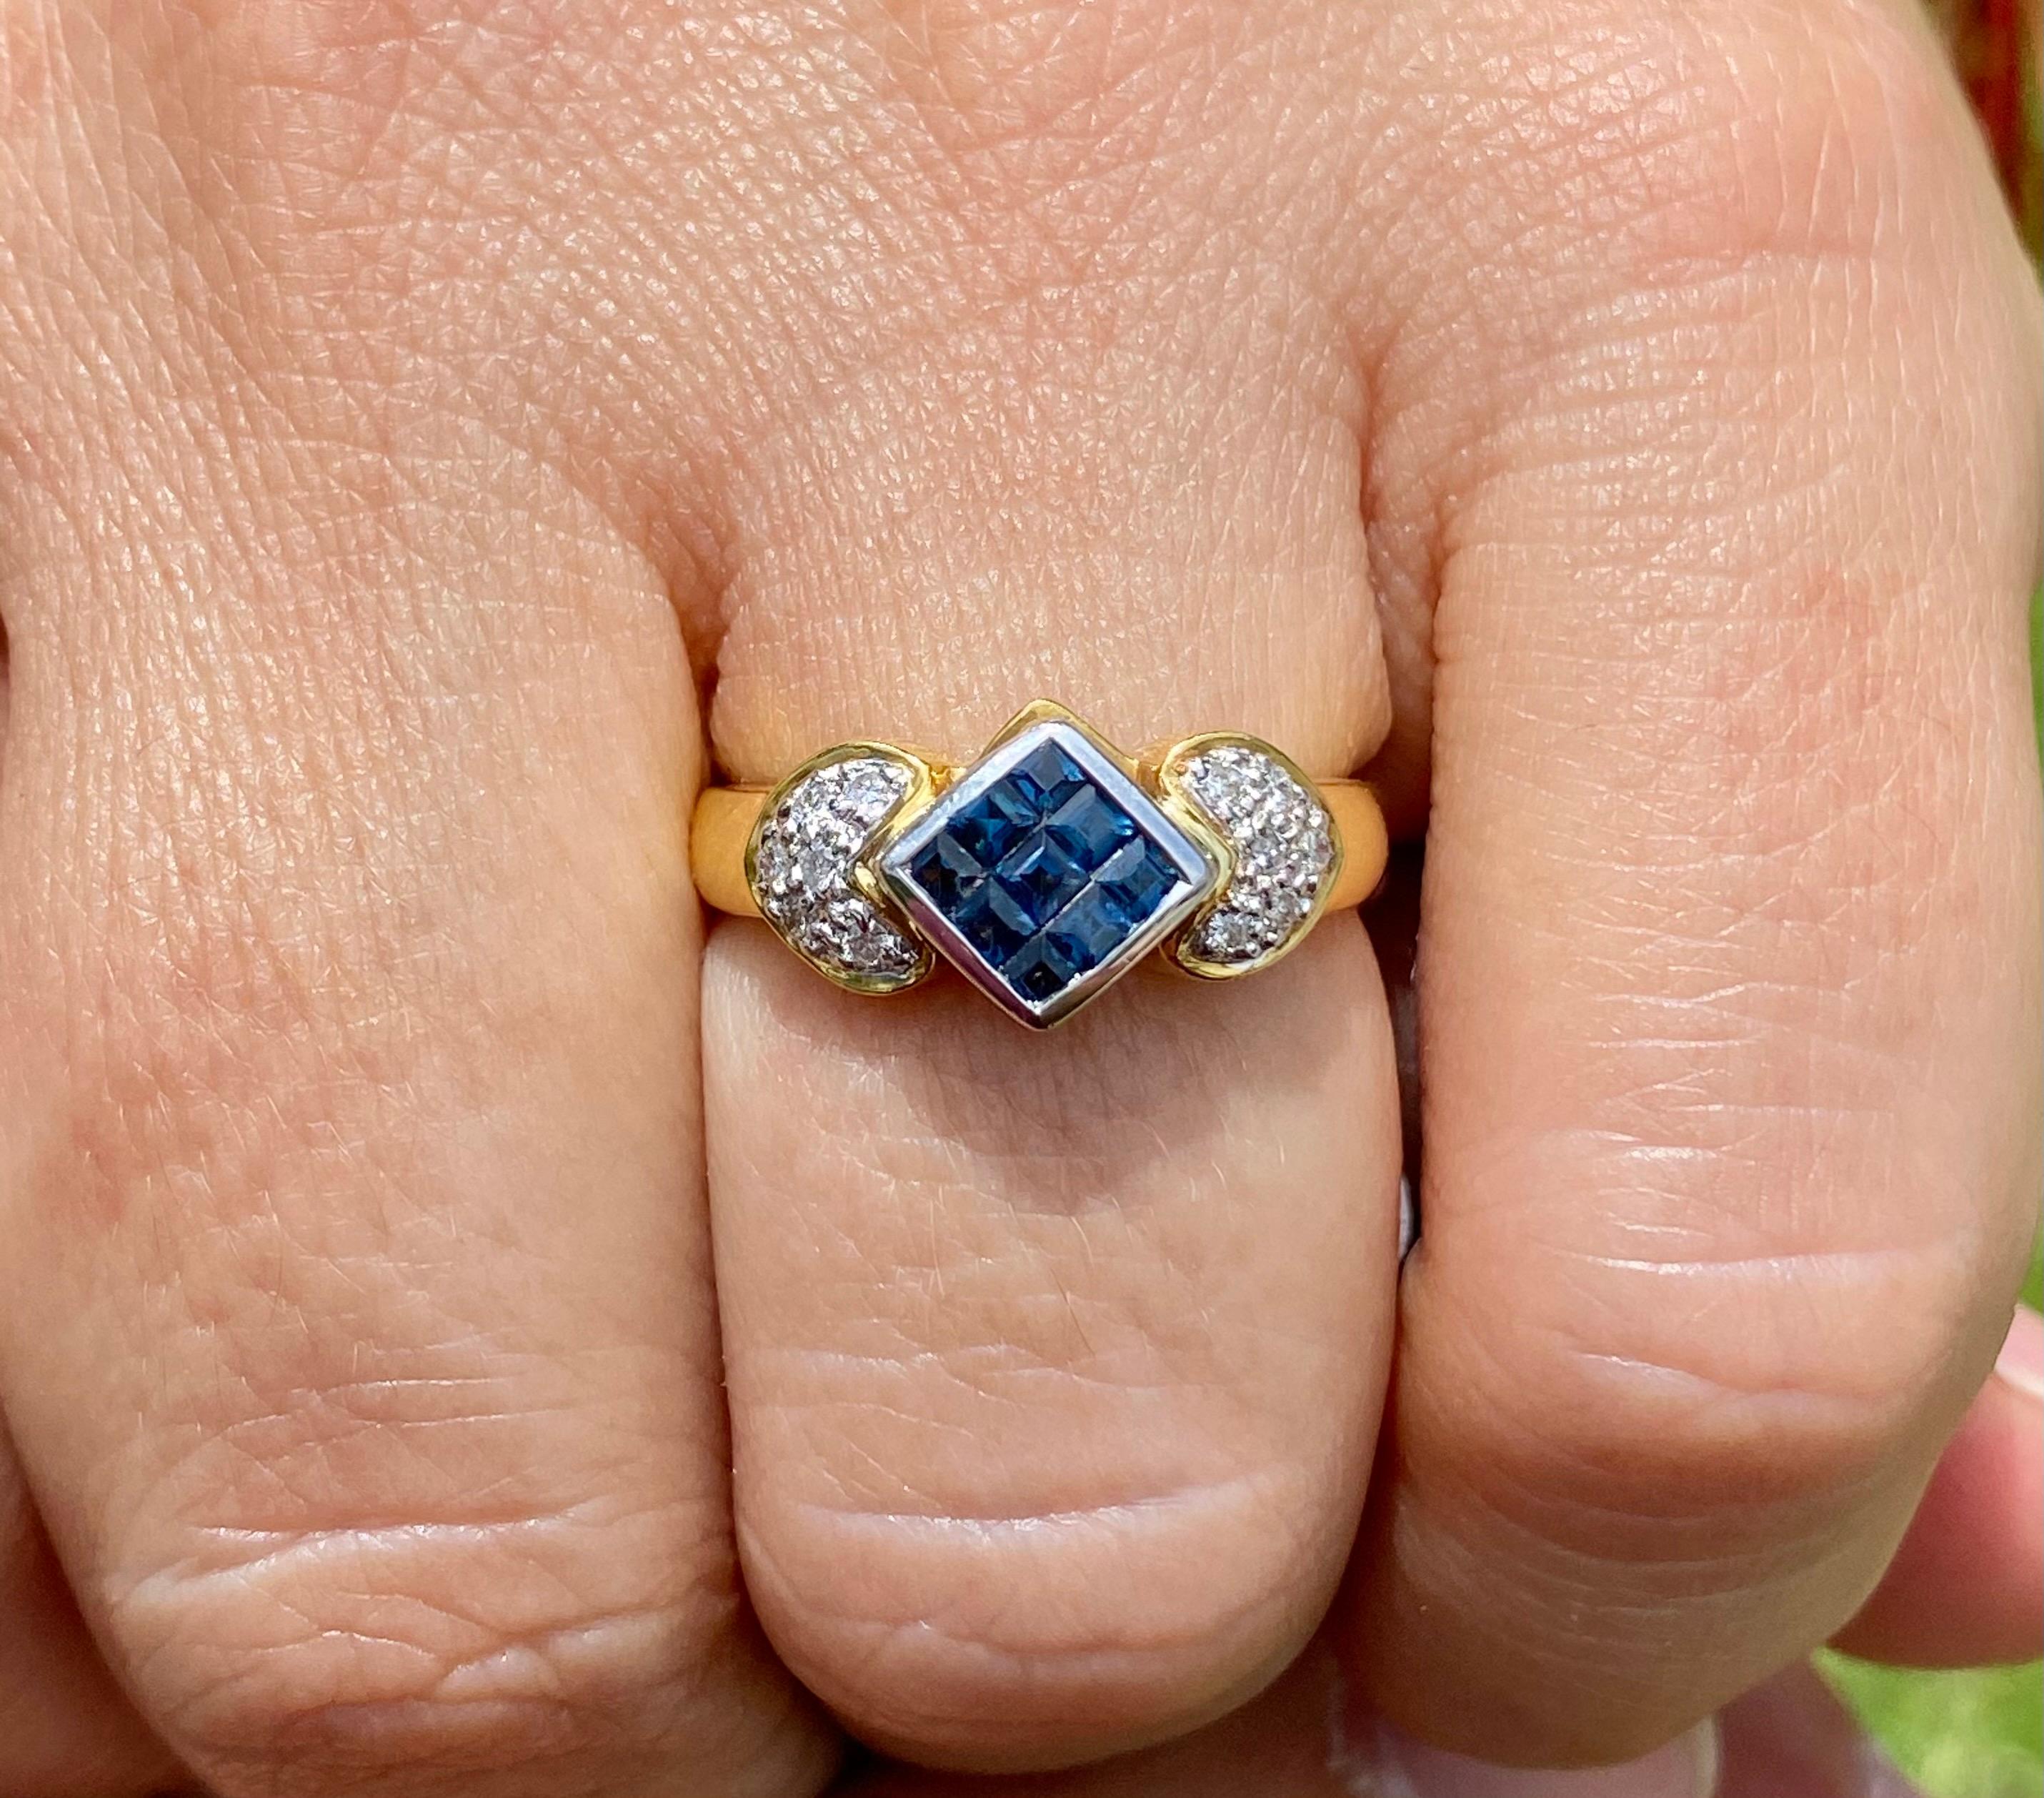 Adorned by 0.50 Carats of Princess-Cut Siam (Thailand) Blue Sapphires and 0.15 Carats of Round-Brilliant Cut White Diamonds and set in 18K Yellow Gold

Details:
✔ Stone: Blue Sapphire, White Diamond 
✔ Sapphire Weight: 0.50 carats (9 stones)
✔